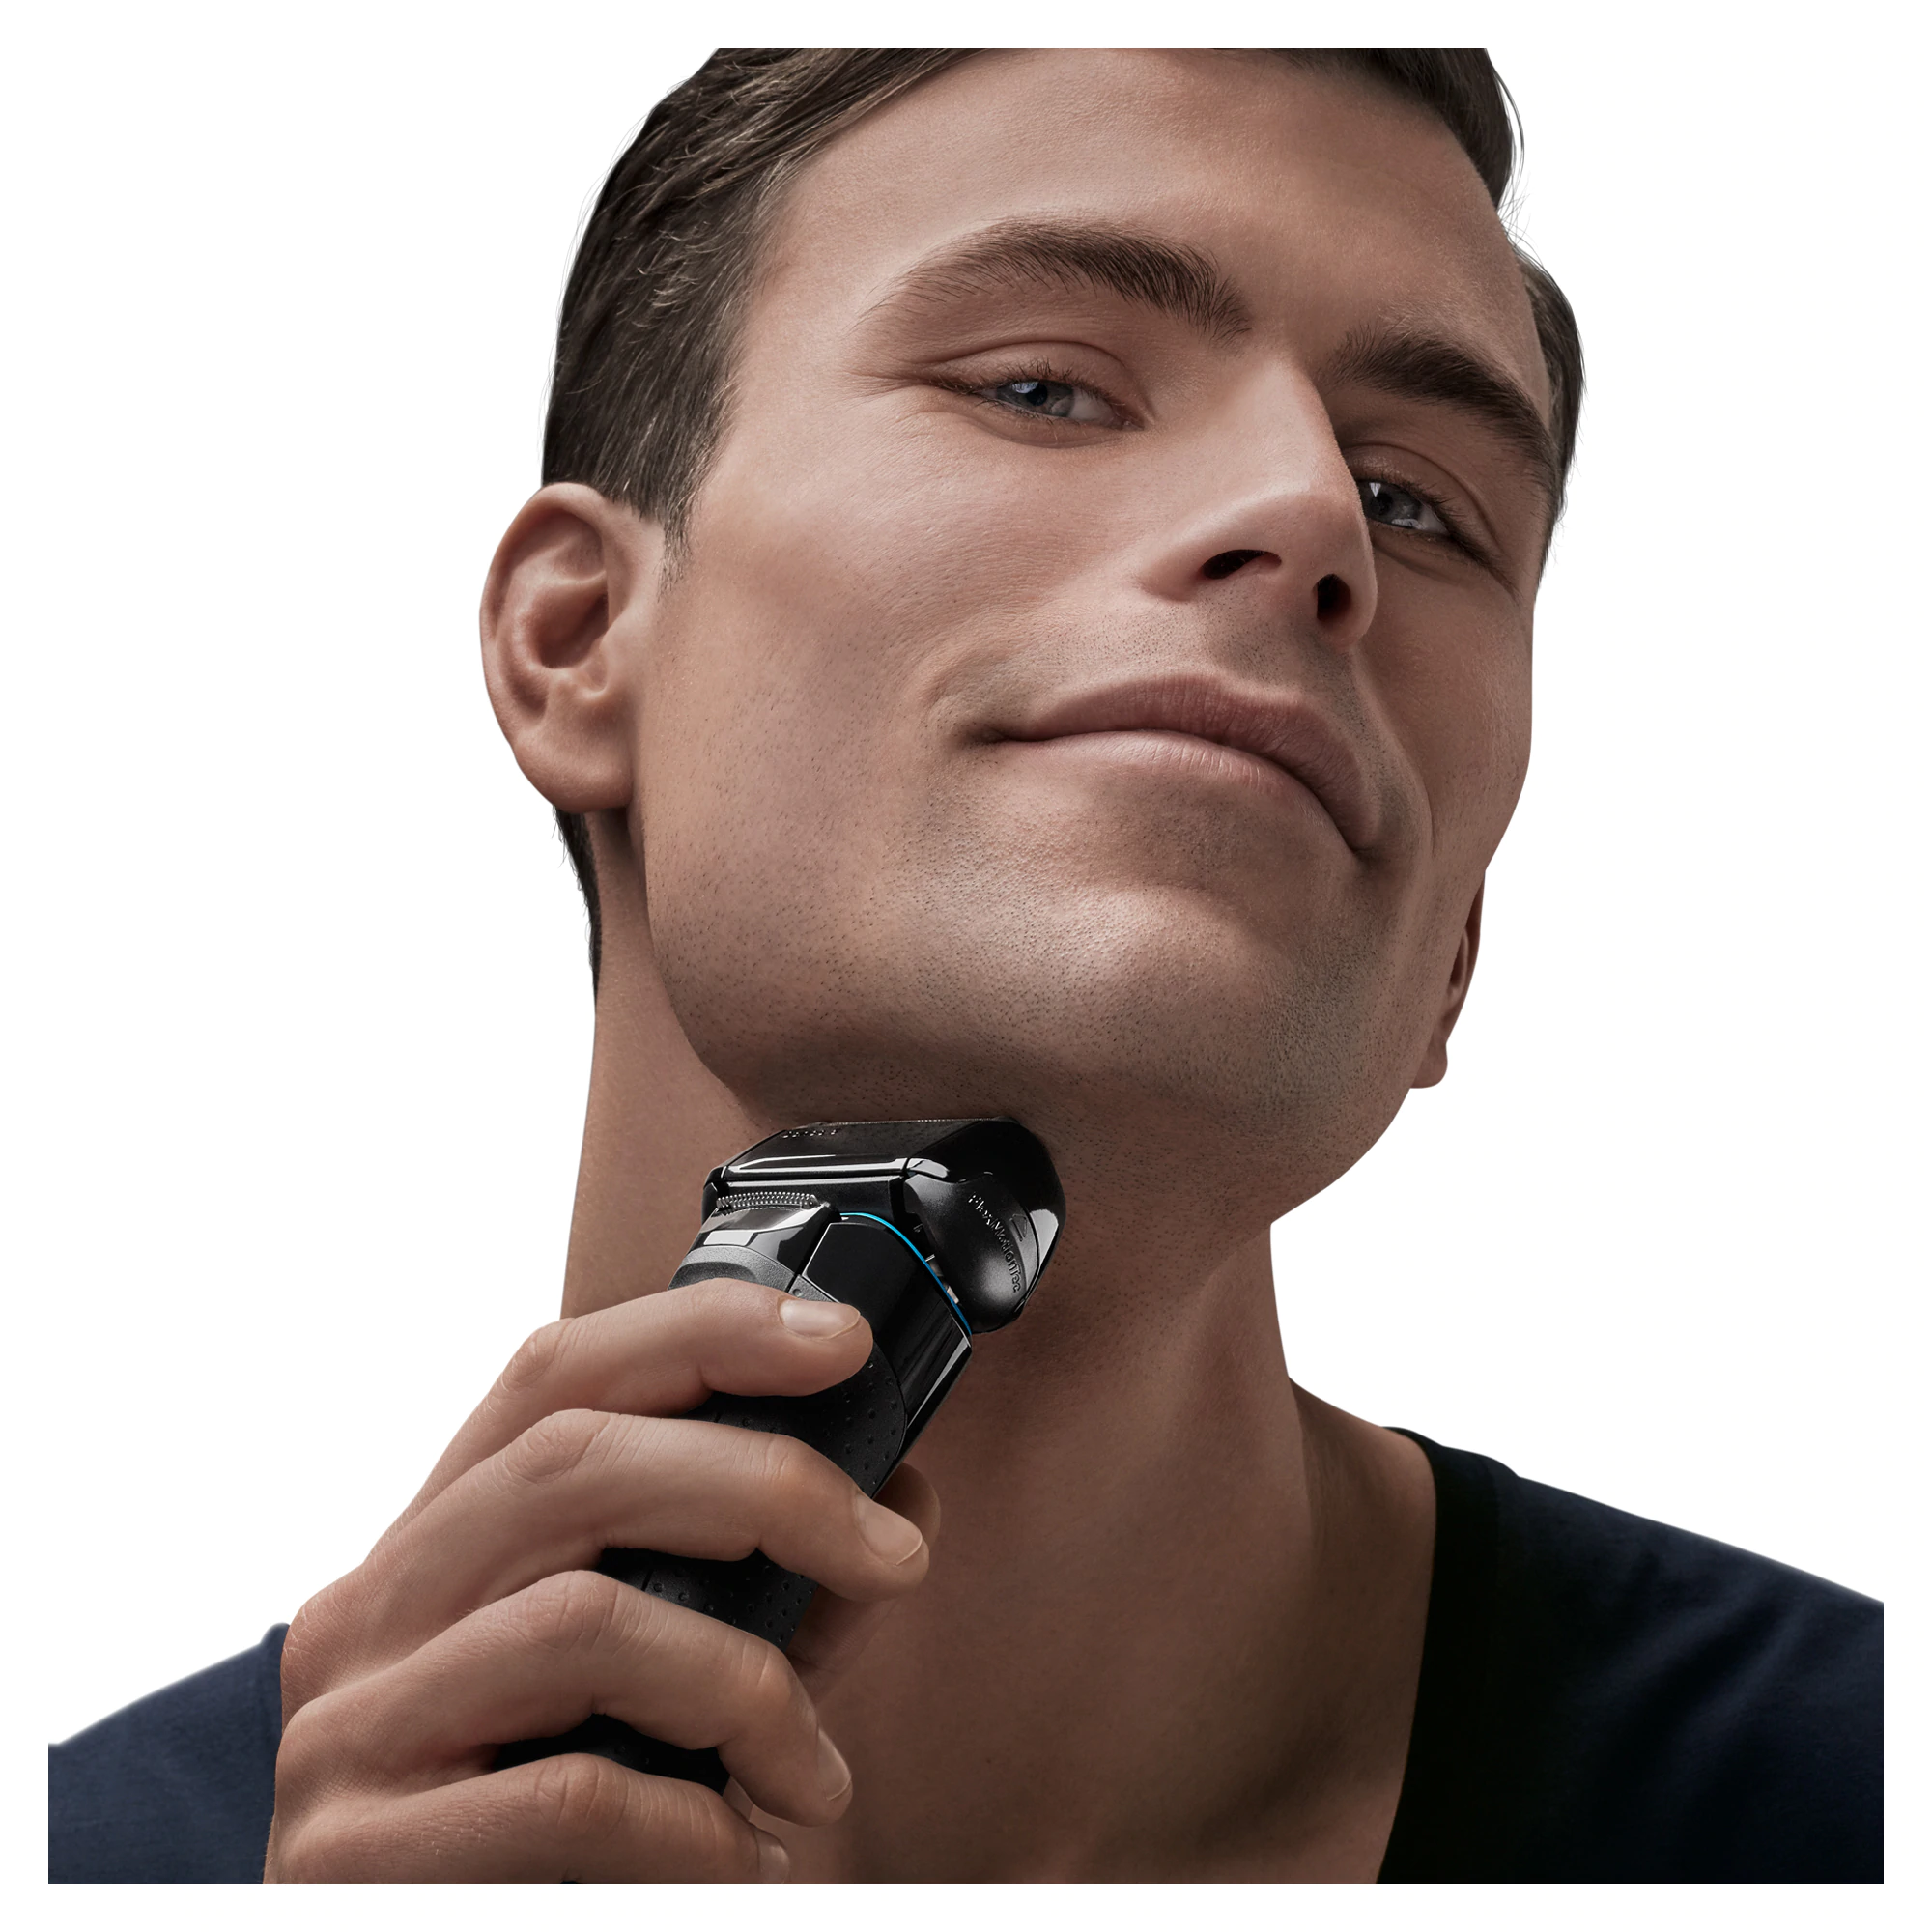 Braun Electric Hair Clipper for men, Series 5, Wet and Dry use, Black, 5195cc